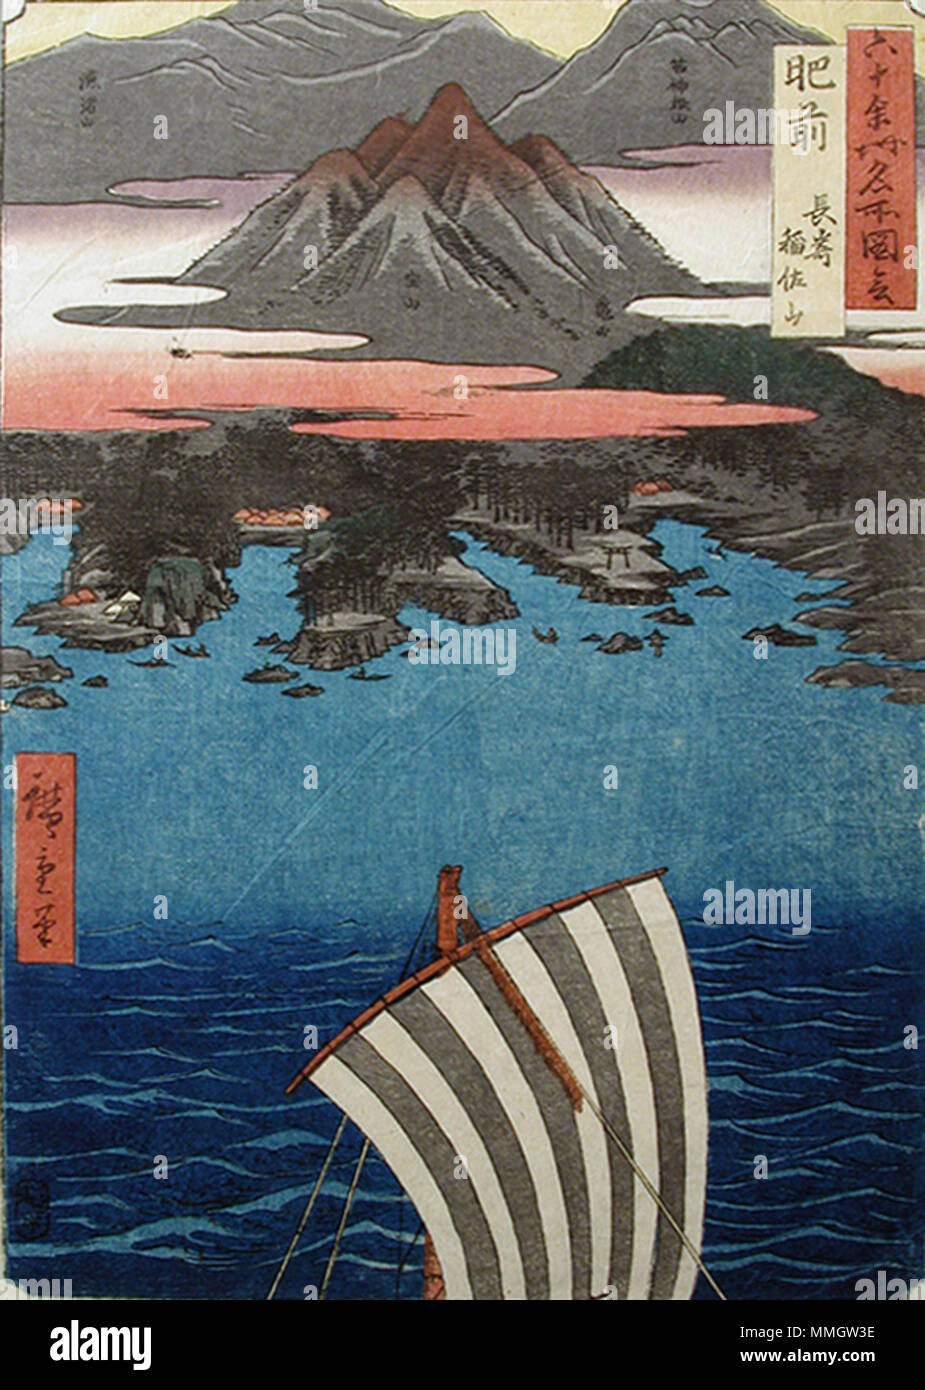 . English: Accession Number: 1957.282 Display Artist: Utagawa Hiroshige Display Title: 'Hizen Province, Nagasaki, Mount Inasa' Translation(s): '(Hizen, Nagasaki Inasayama)' Series Title: Famous Views of the Sixty-odd Provinces Suite Name: Rokujuyoshu meisho zue Creation Date: 1856 Medium: Woodblock Height: 13 7/16 in. Width: 8 7/8 in. Display Dimensions: 13 7/16 in. x 8 7/8 in. (34.13 cm x 22.54 cm) Publisher: Koshimuraya Heisuke Credit Line: Bequest of Mrs. Cora Timken Burnett Label Copy: 'One of Series: Rokuju ye Shin. Meisho dzu. ''View of 60 or More Provinces''. Published by Koshei kei in  Stock Photo